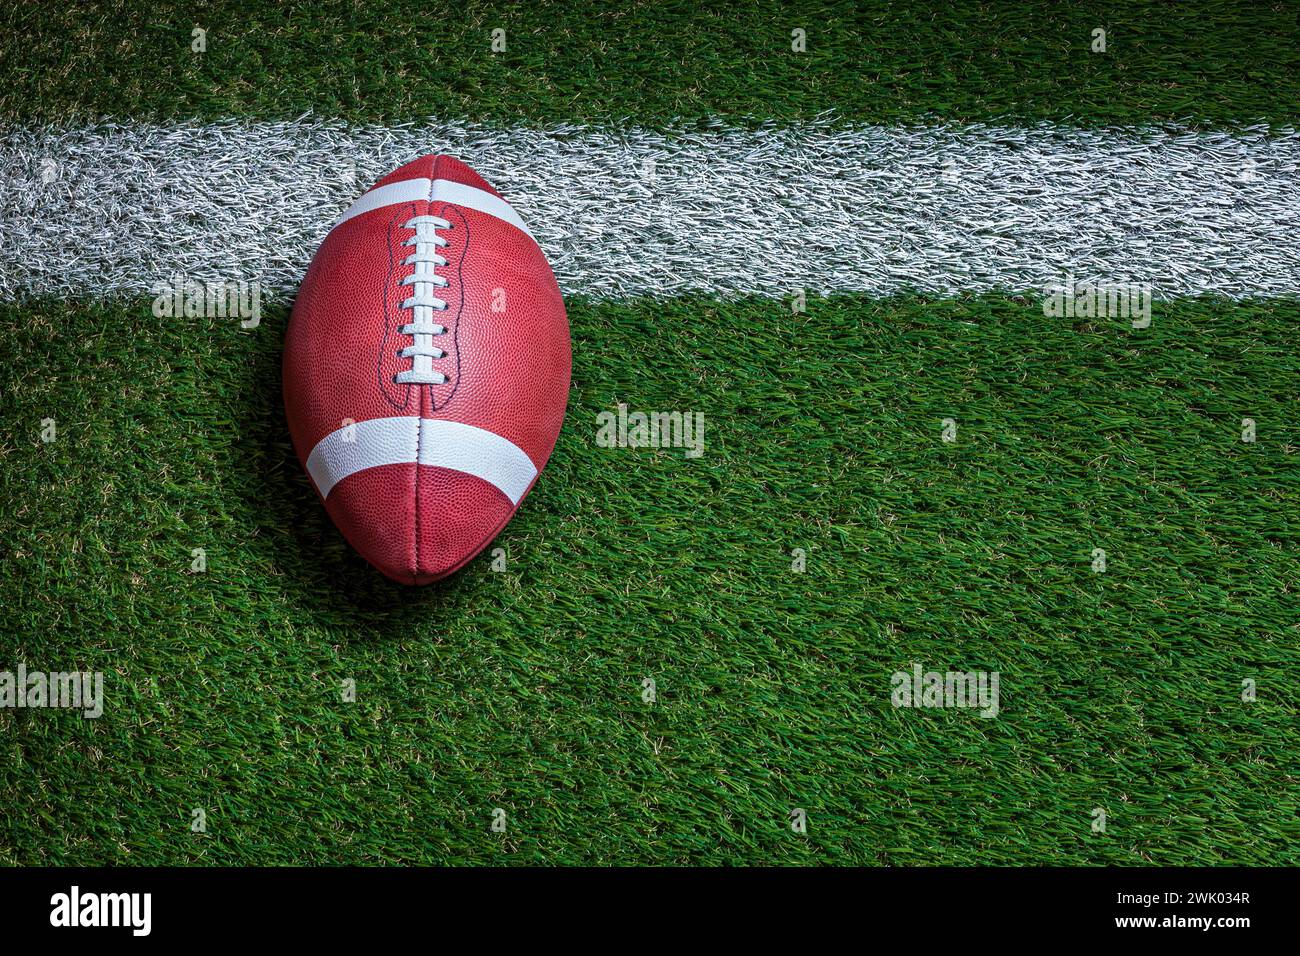 Football at the goal line on a grass field overhead view Stock Photo